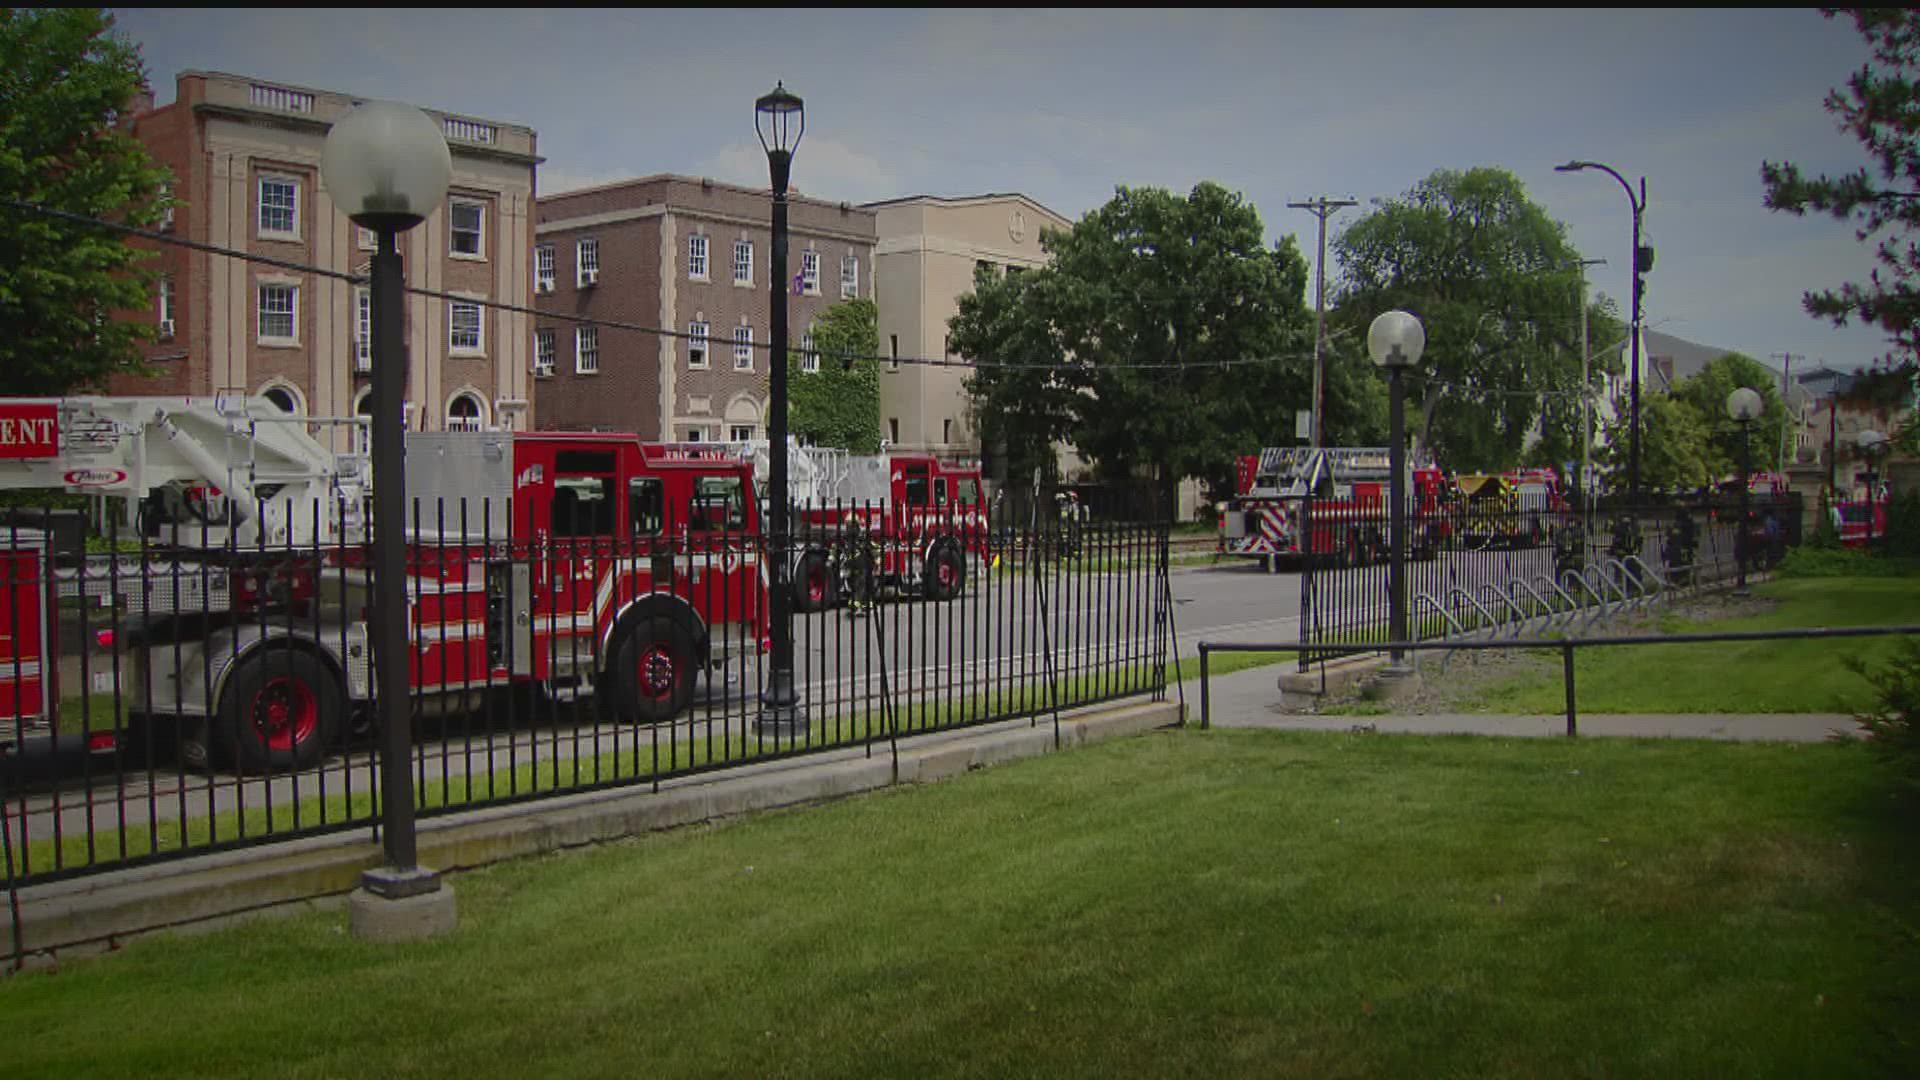 Officials with Minneapolis Fire say the cause is more likely due to a flammable gas spill rather than natural gas in the sewer.